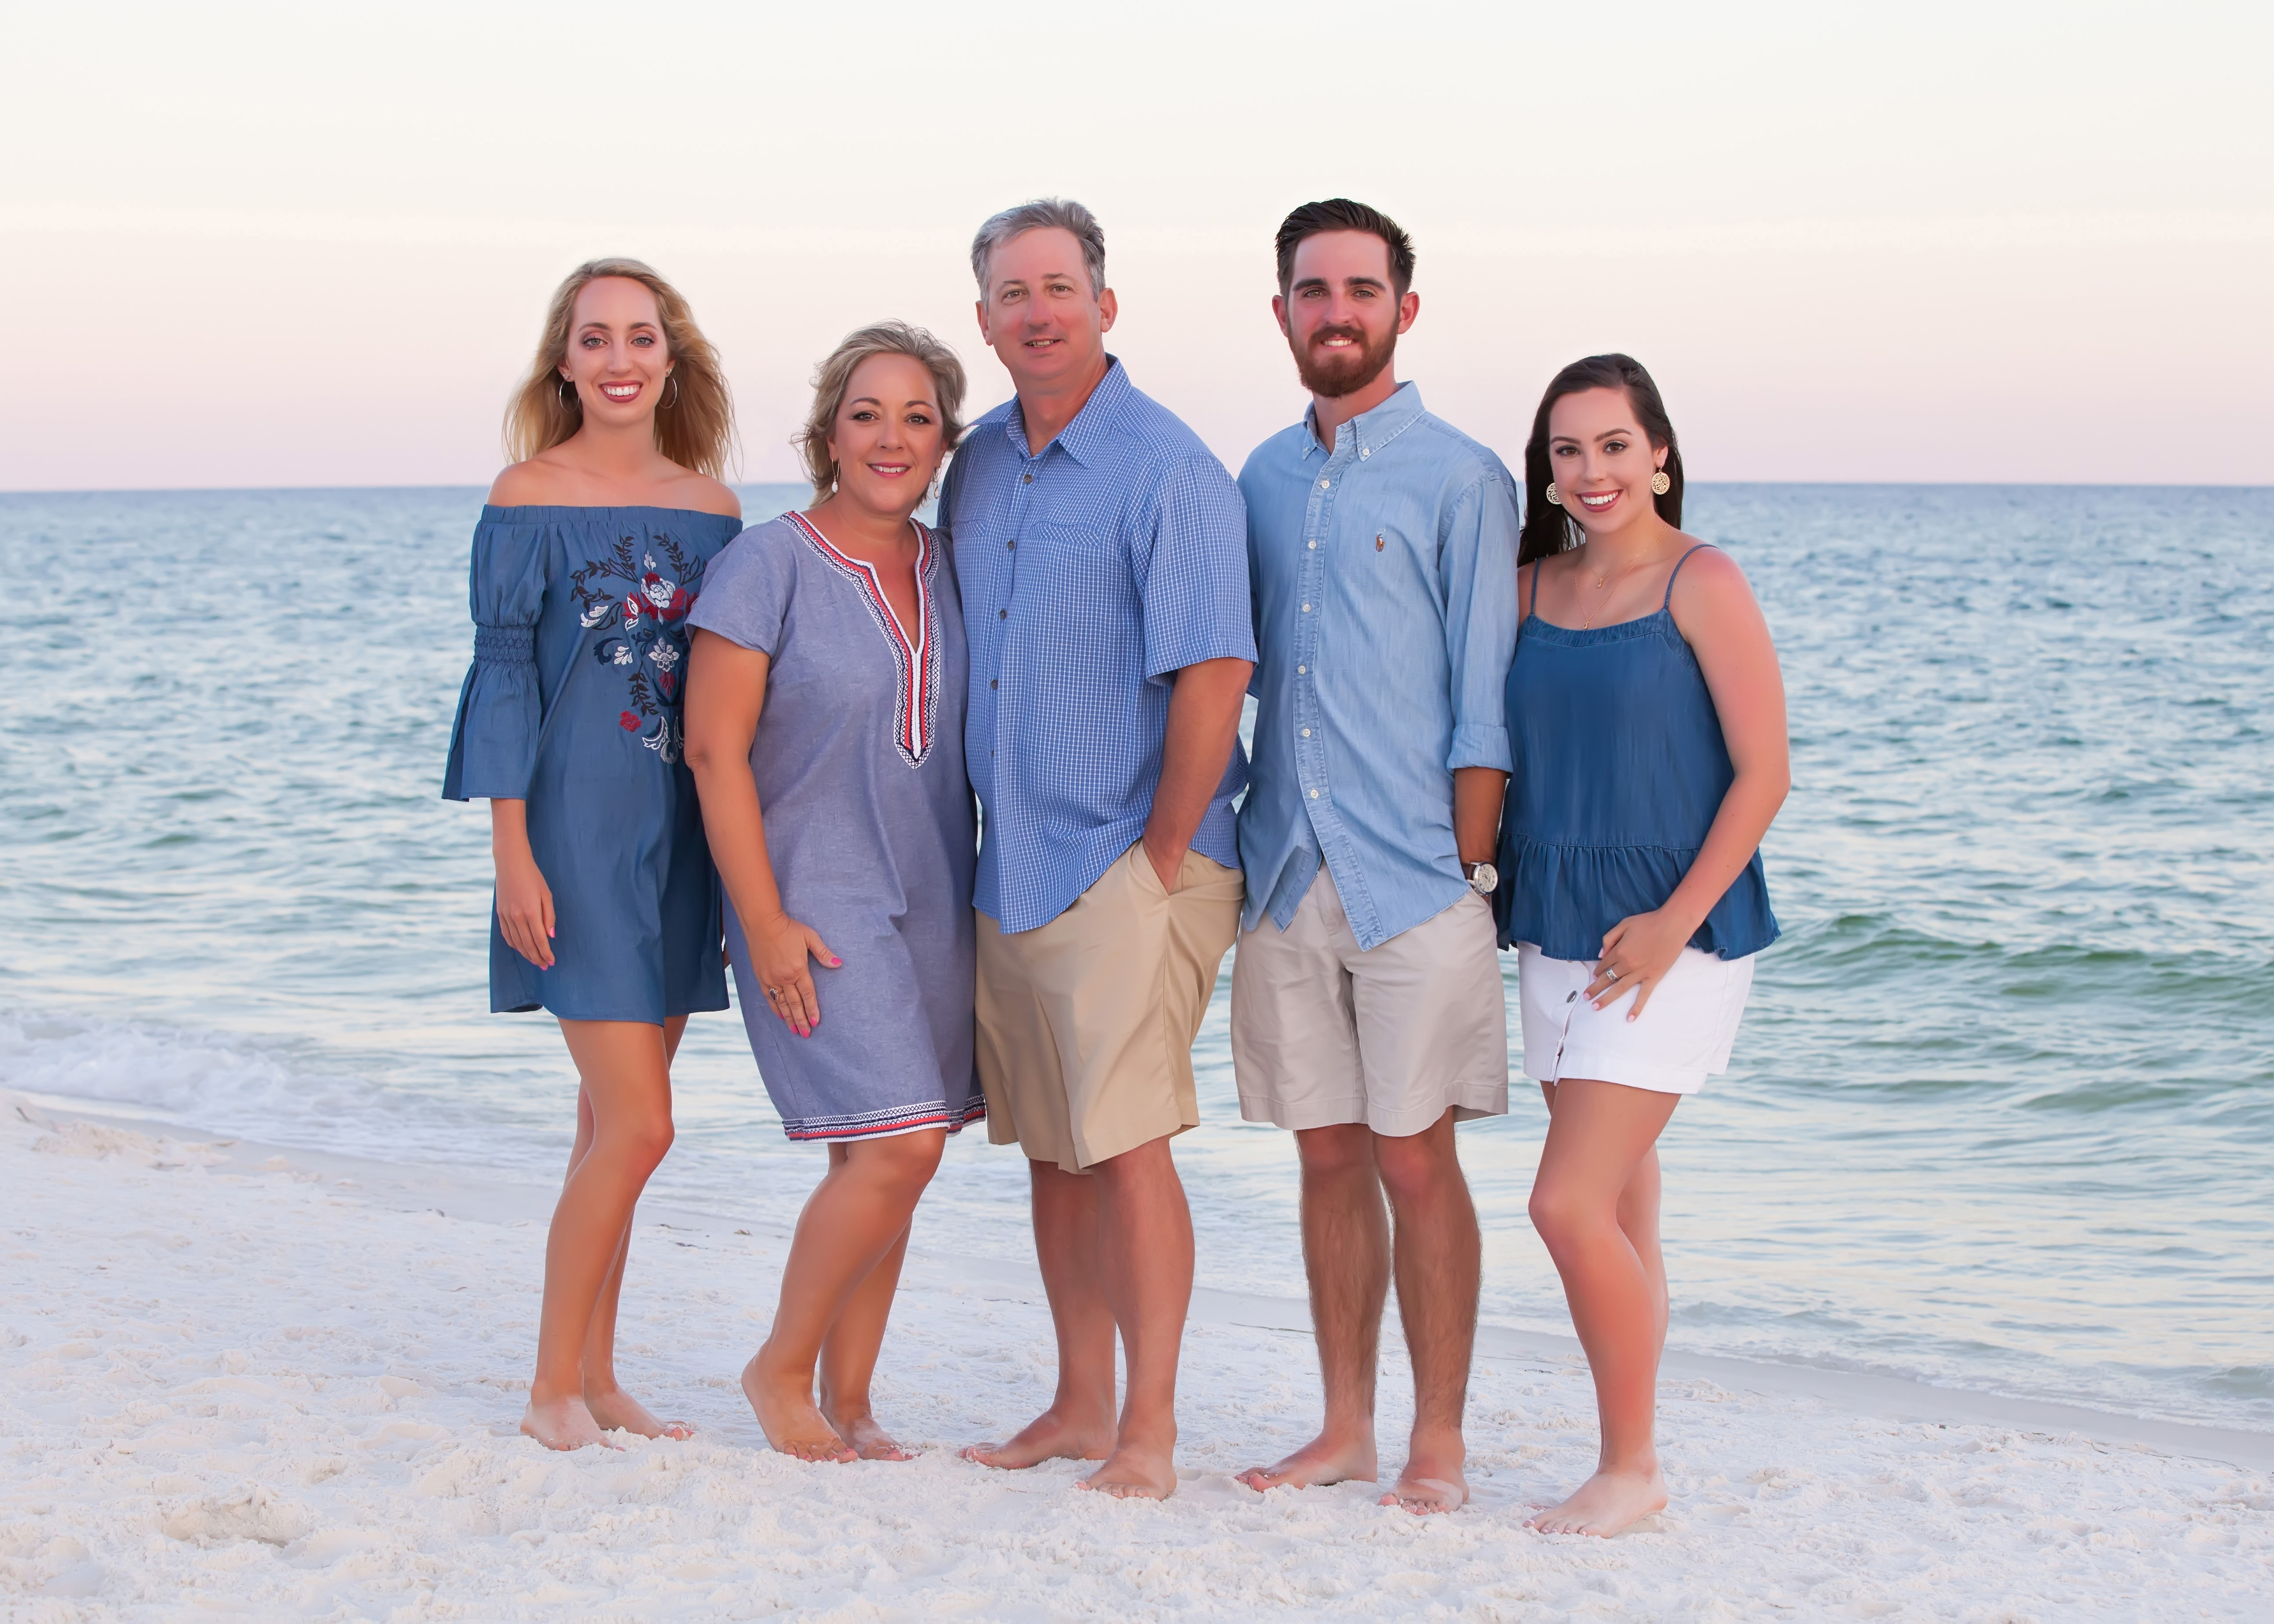 Destin Photography by Tiffany Sims Photography #destin #destinphotography #destinbeachphotography #30aphotography #30abeachphotography #destinphotographer #30aphotographer #fortwaltonbeachphotography #okaloosaislandphotography | Destin Photography Henderson Beach State Park